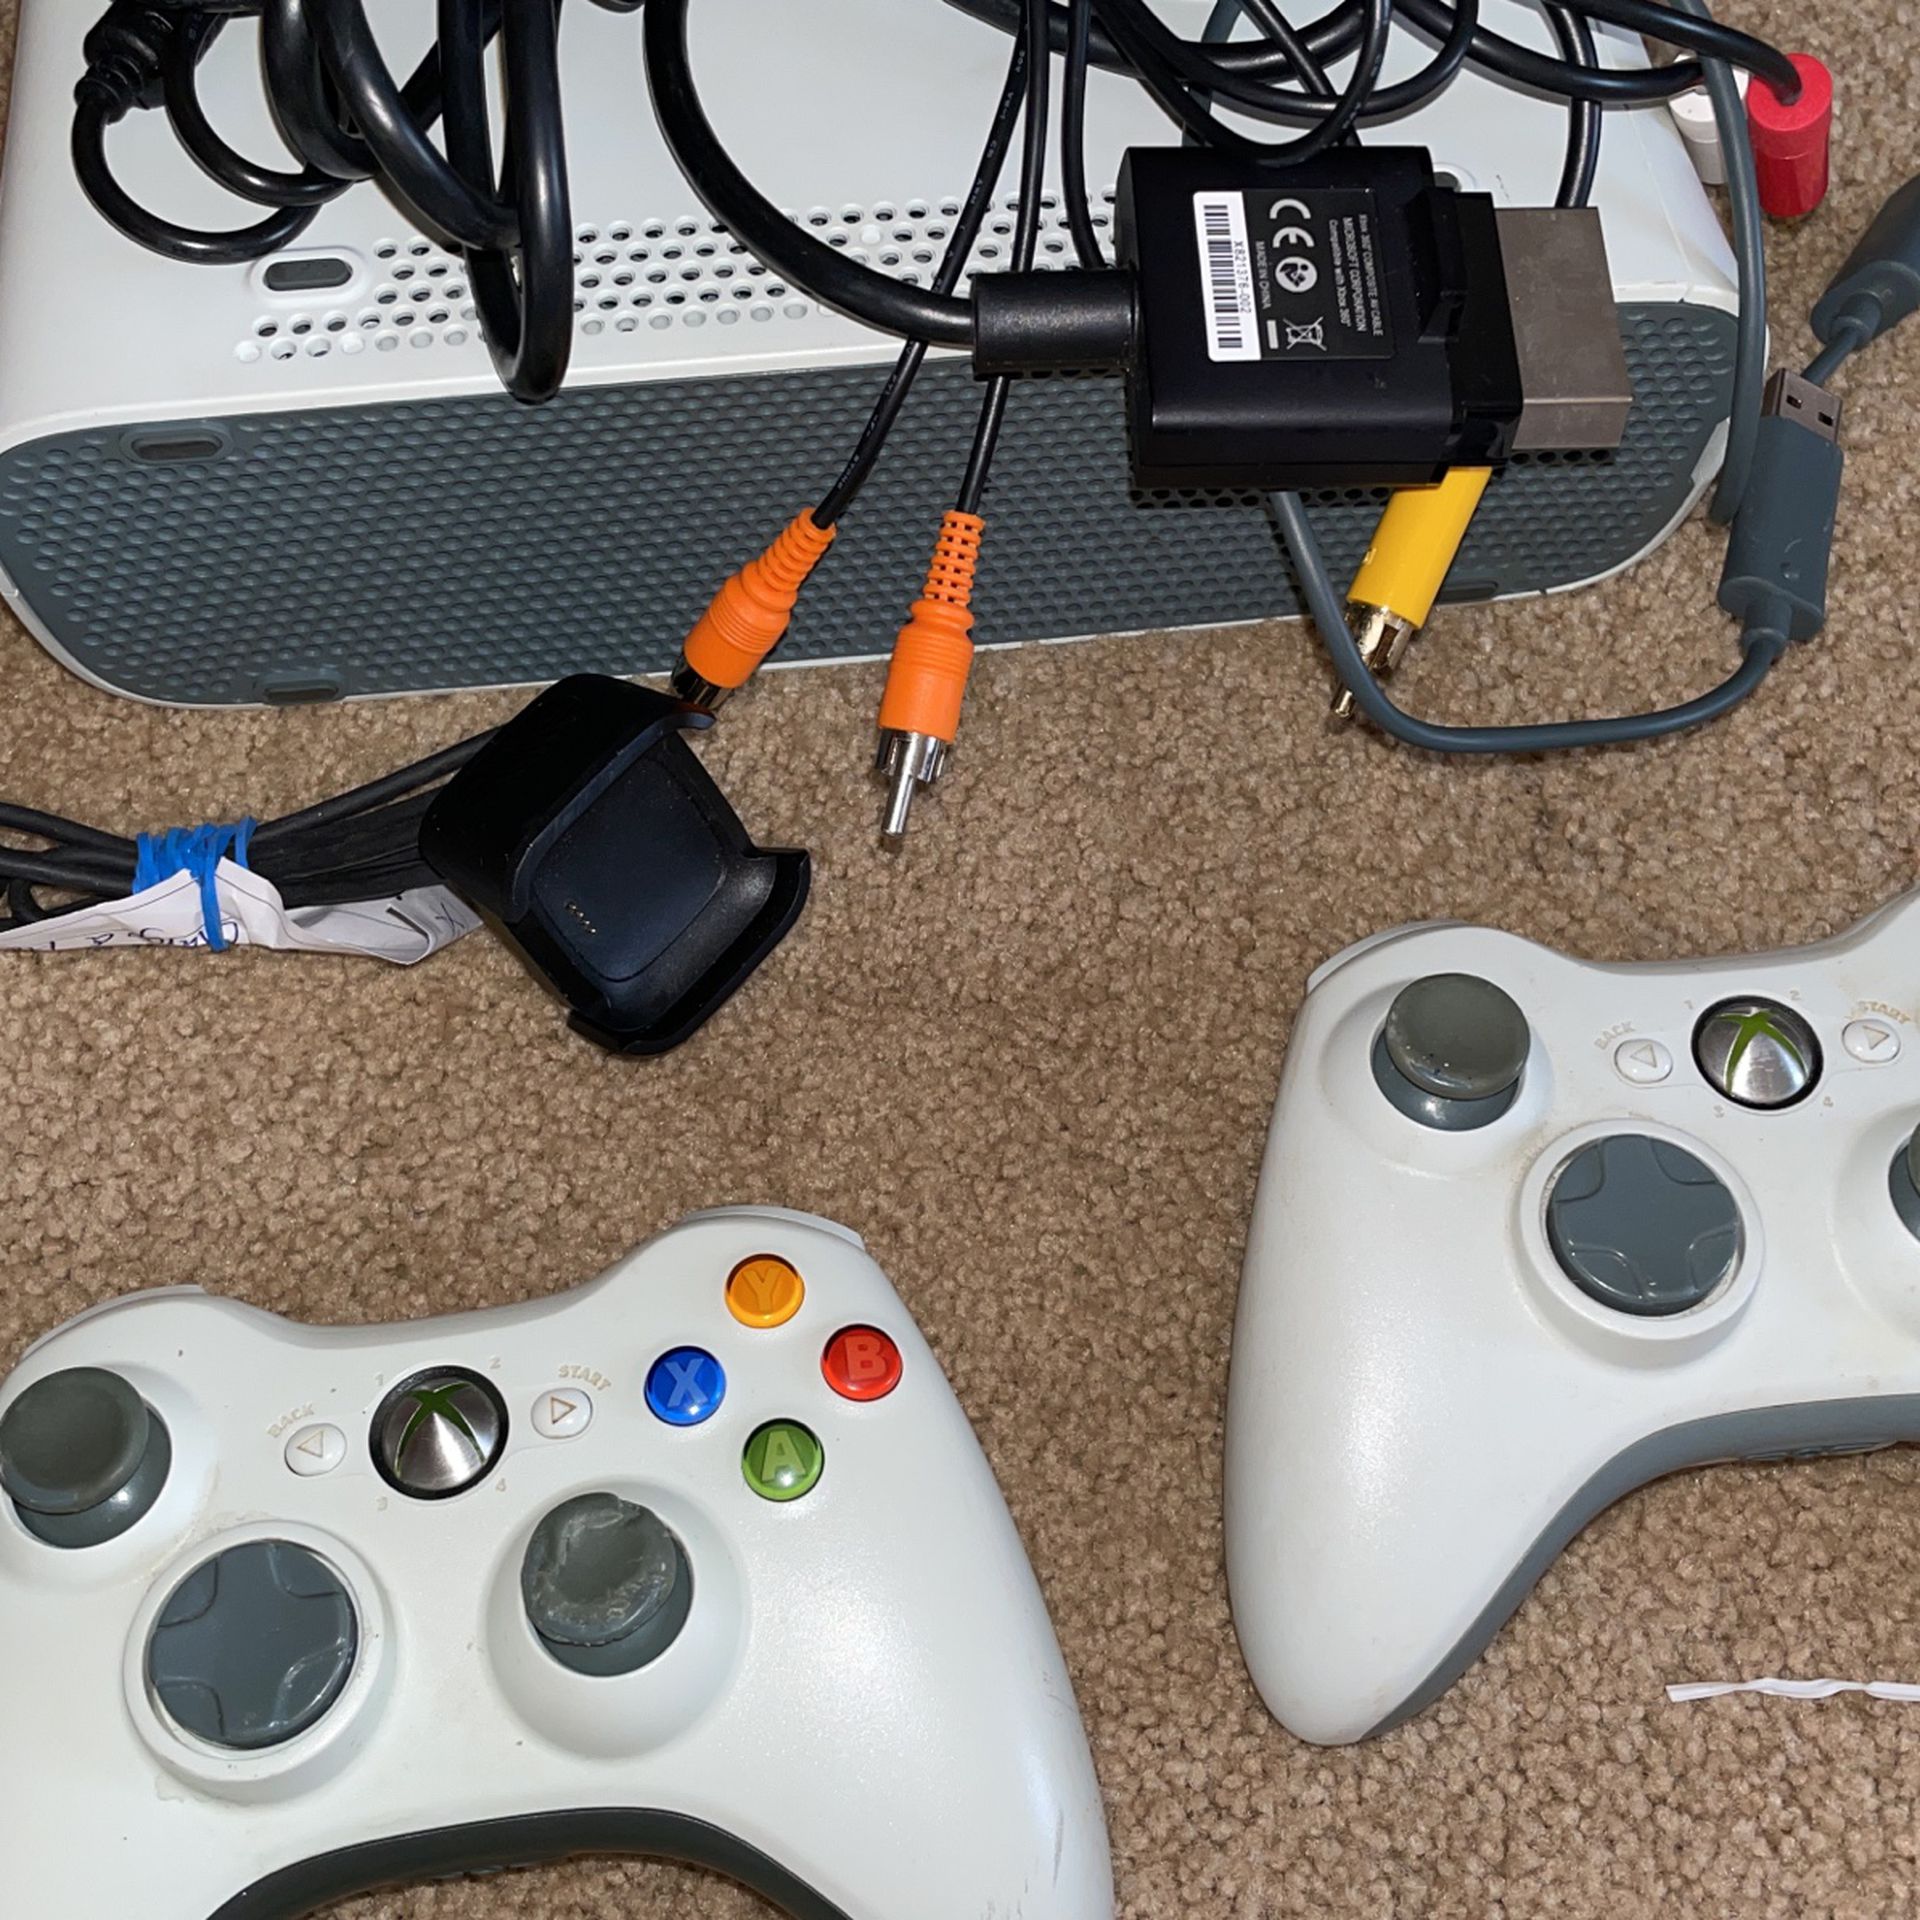 Xbox 360,20 Games ,2 Controllers, Apple 85w MagSafe Power Adapter,battery Charger